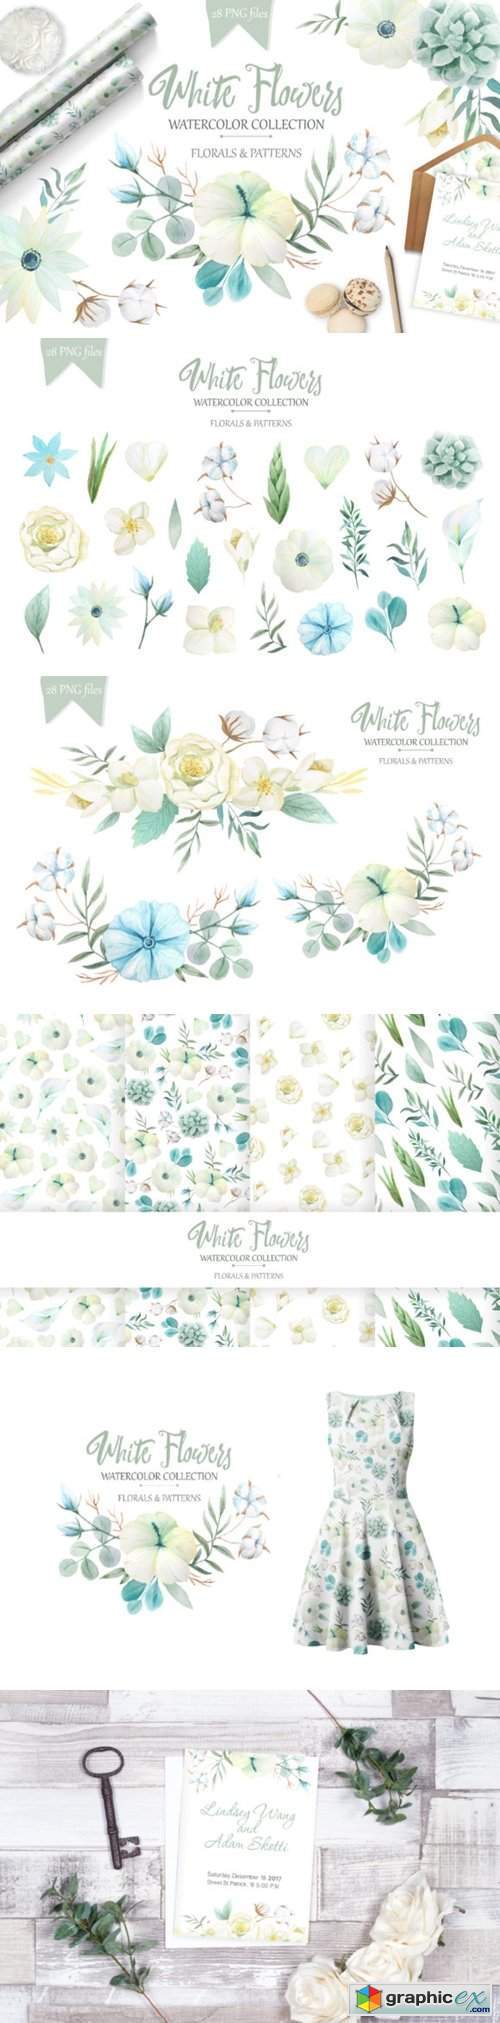 Watercolor White Flowers Set